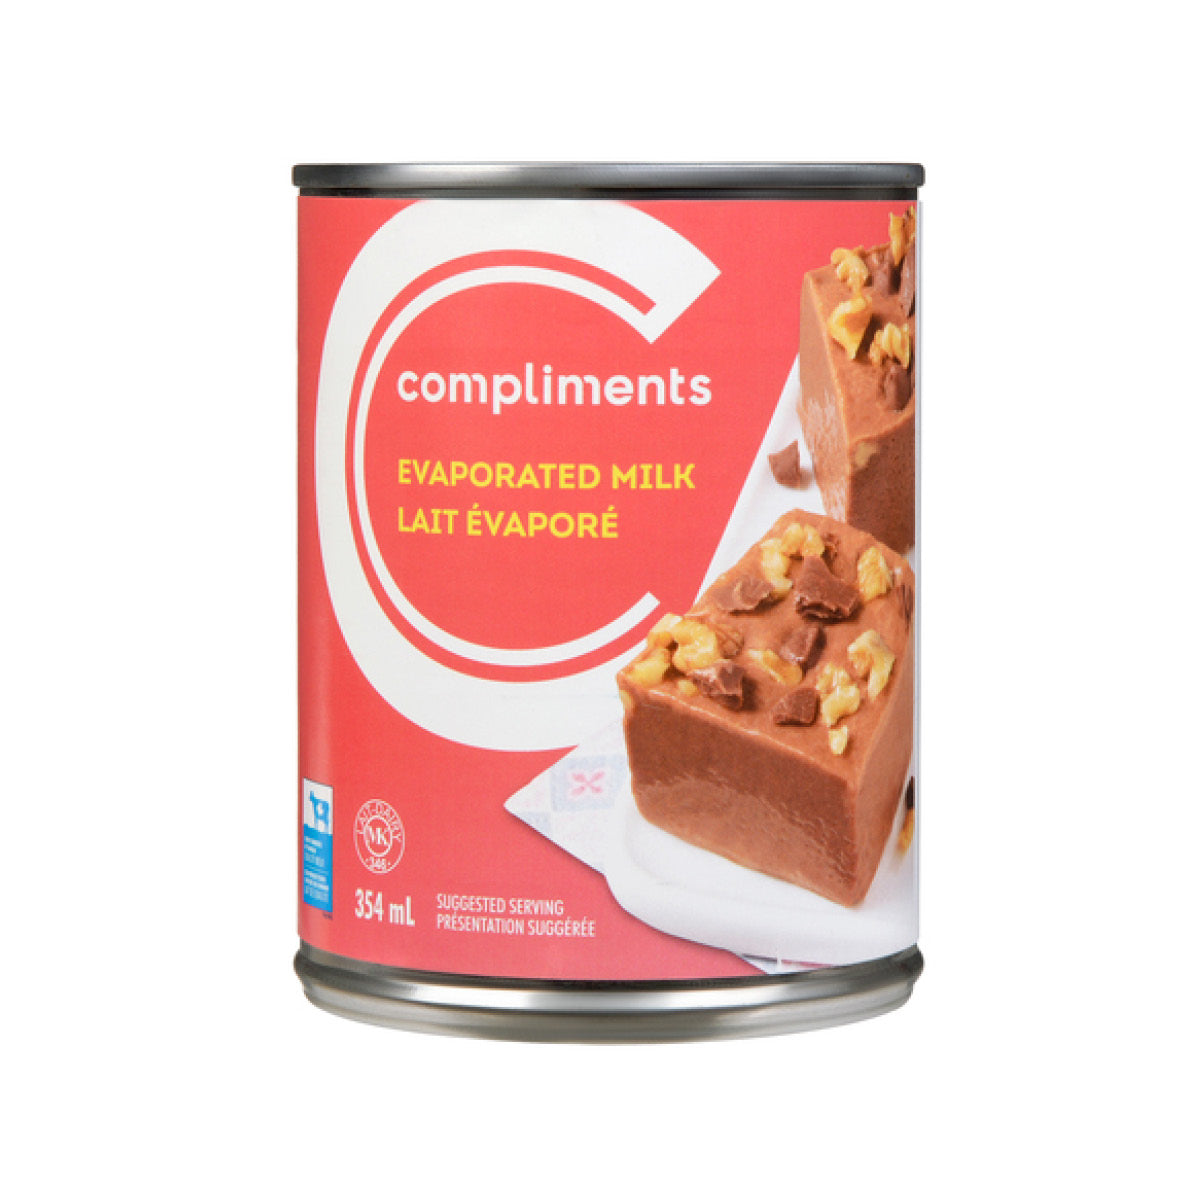 Compliments Evaporated Milk, 354ml